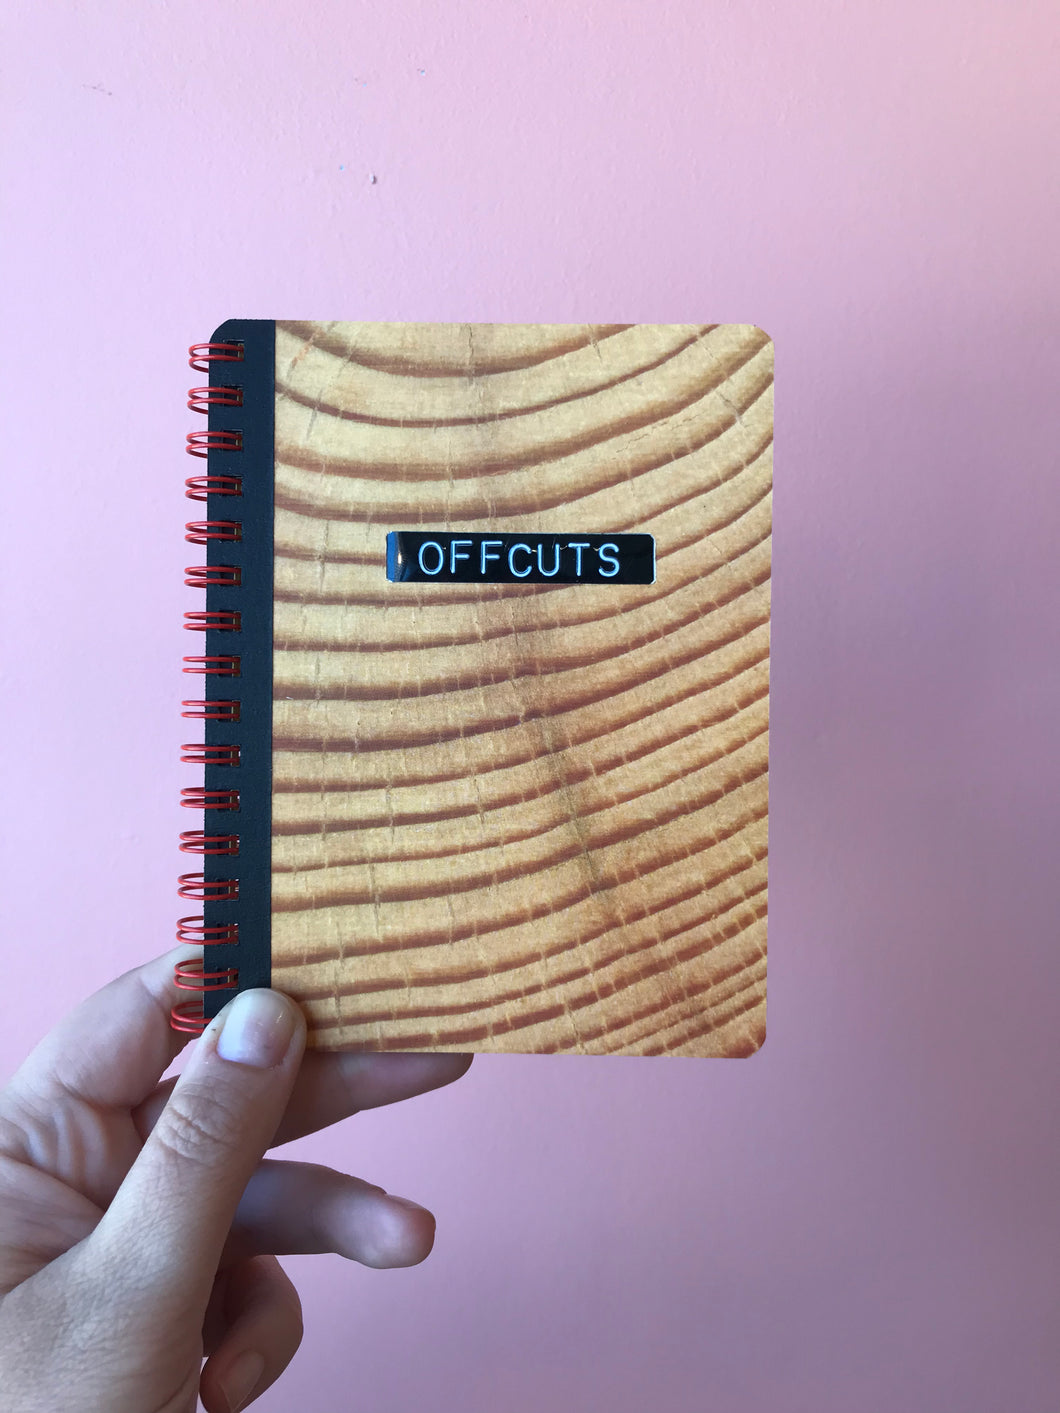 OFFCUTS - handmade rescued notebook